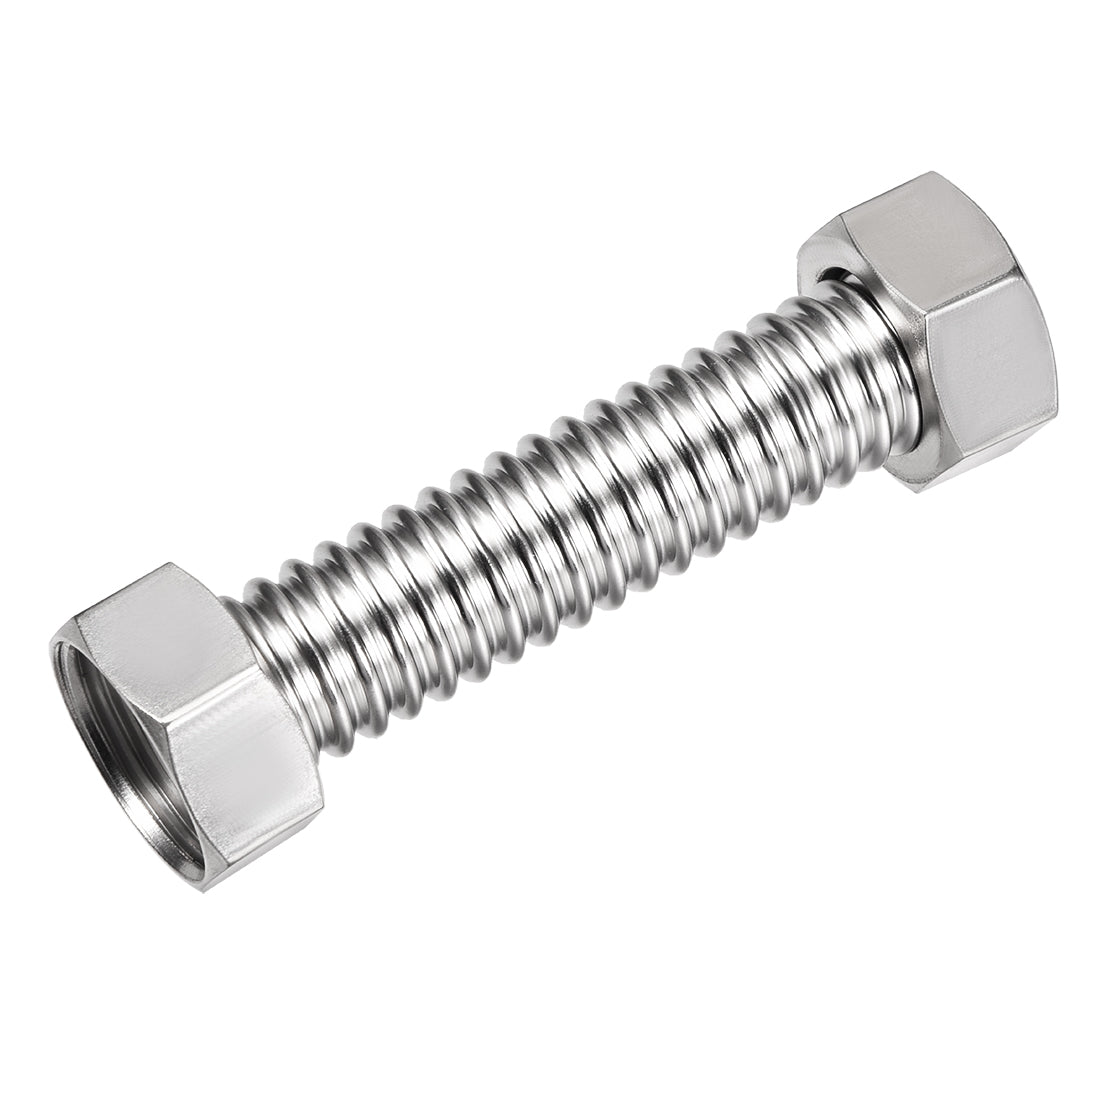 uxcell Uxcell Corrugated Stainless Steel Flexible Water Line 3.9inch Long G1 Female Threaded Connector with Washer